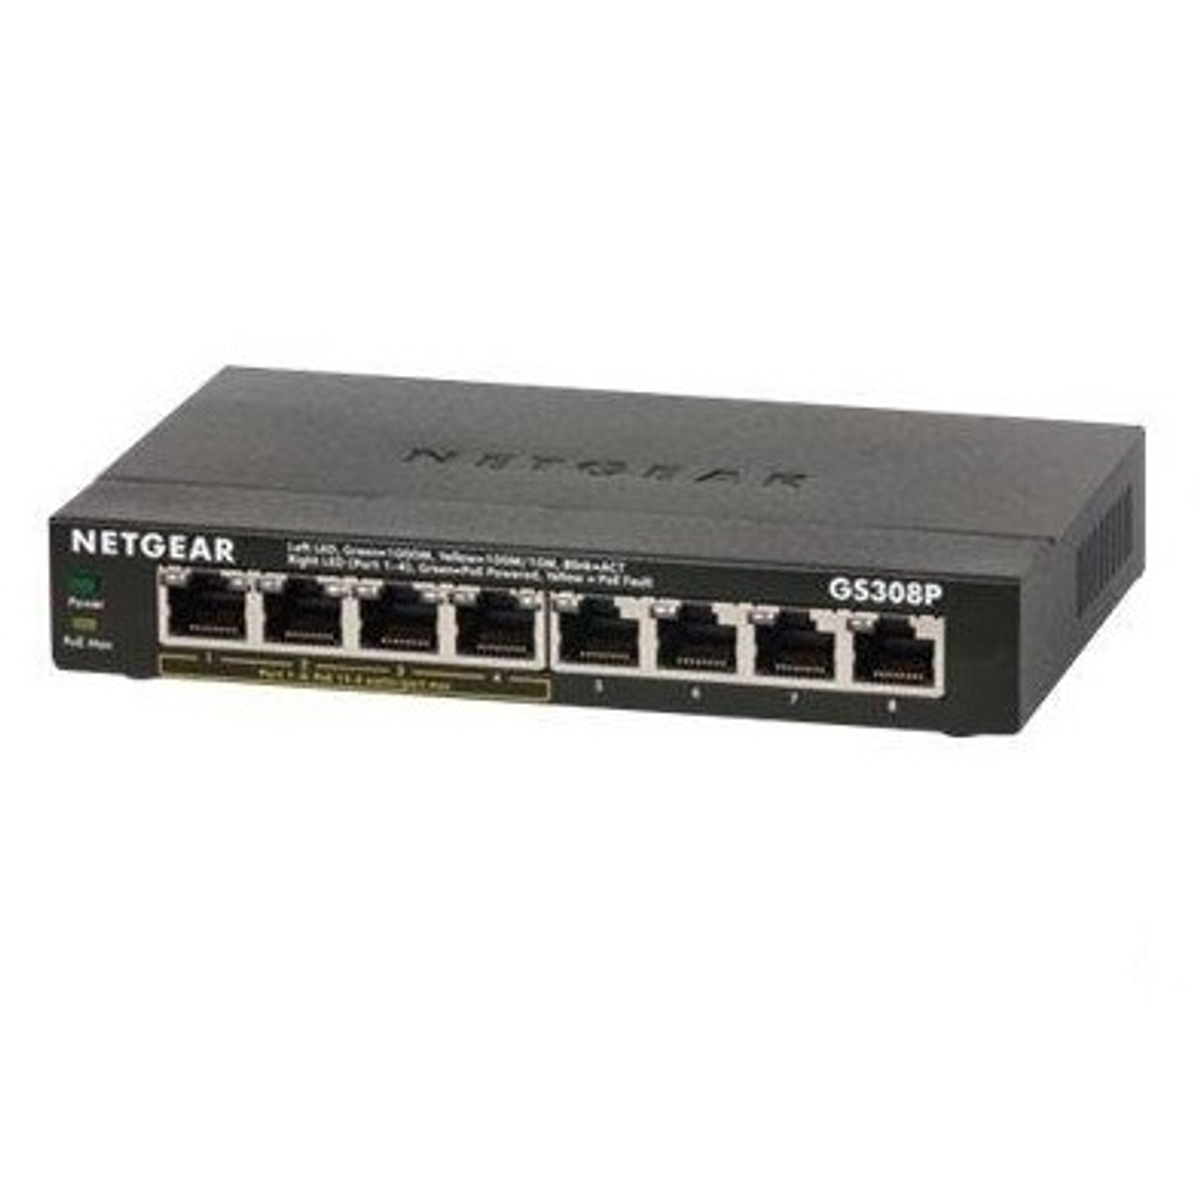 8Pt Unmanaged Poe Switch